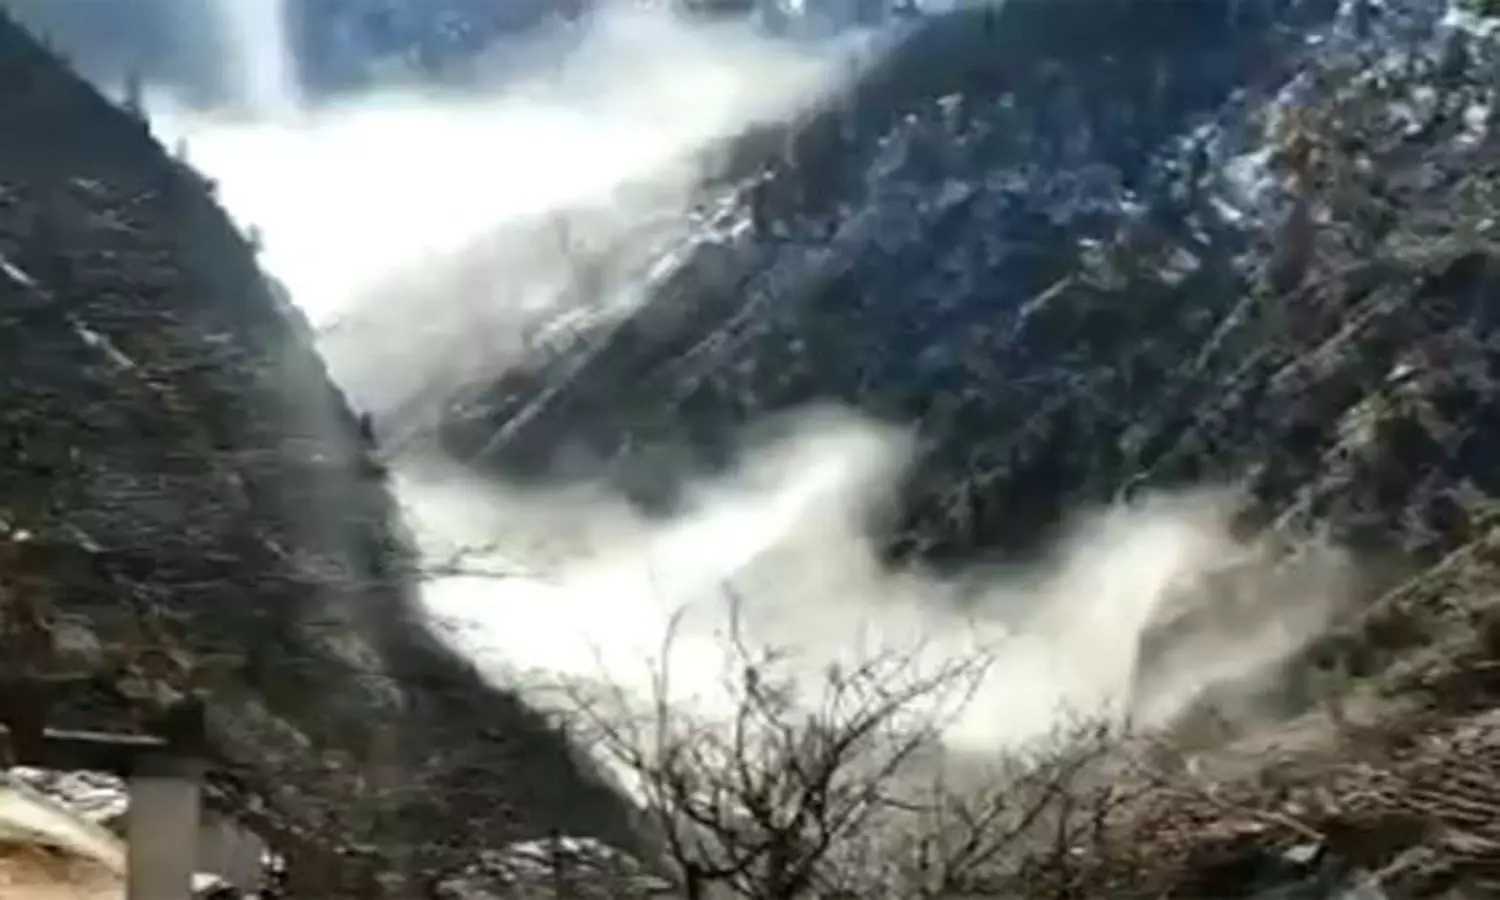 Another glacier burst reported in Uttarakhands Niti Valley, says CM; alert issued